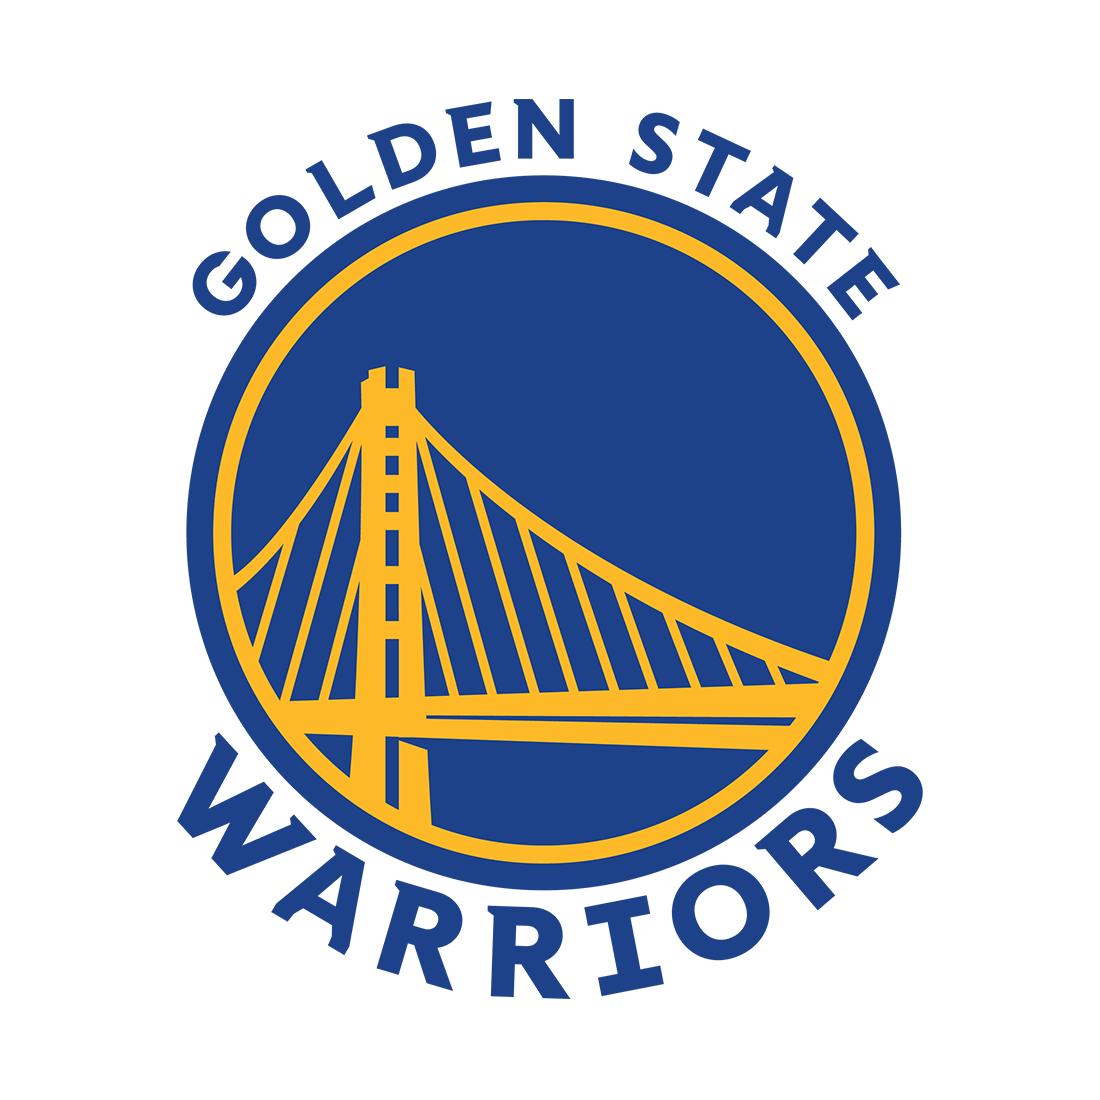 Warriors Golden State Unduh PNG Image